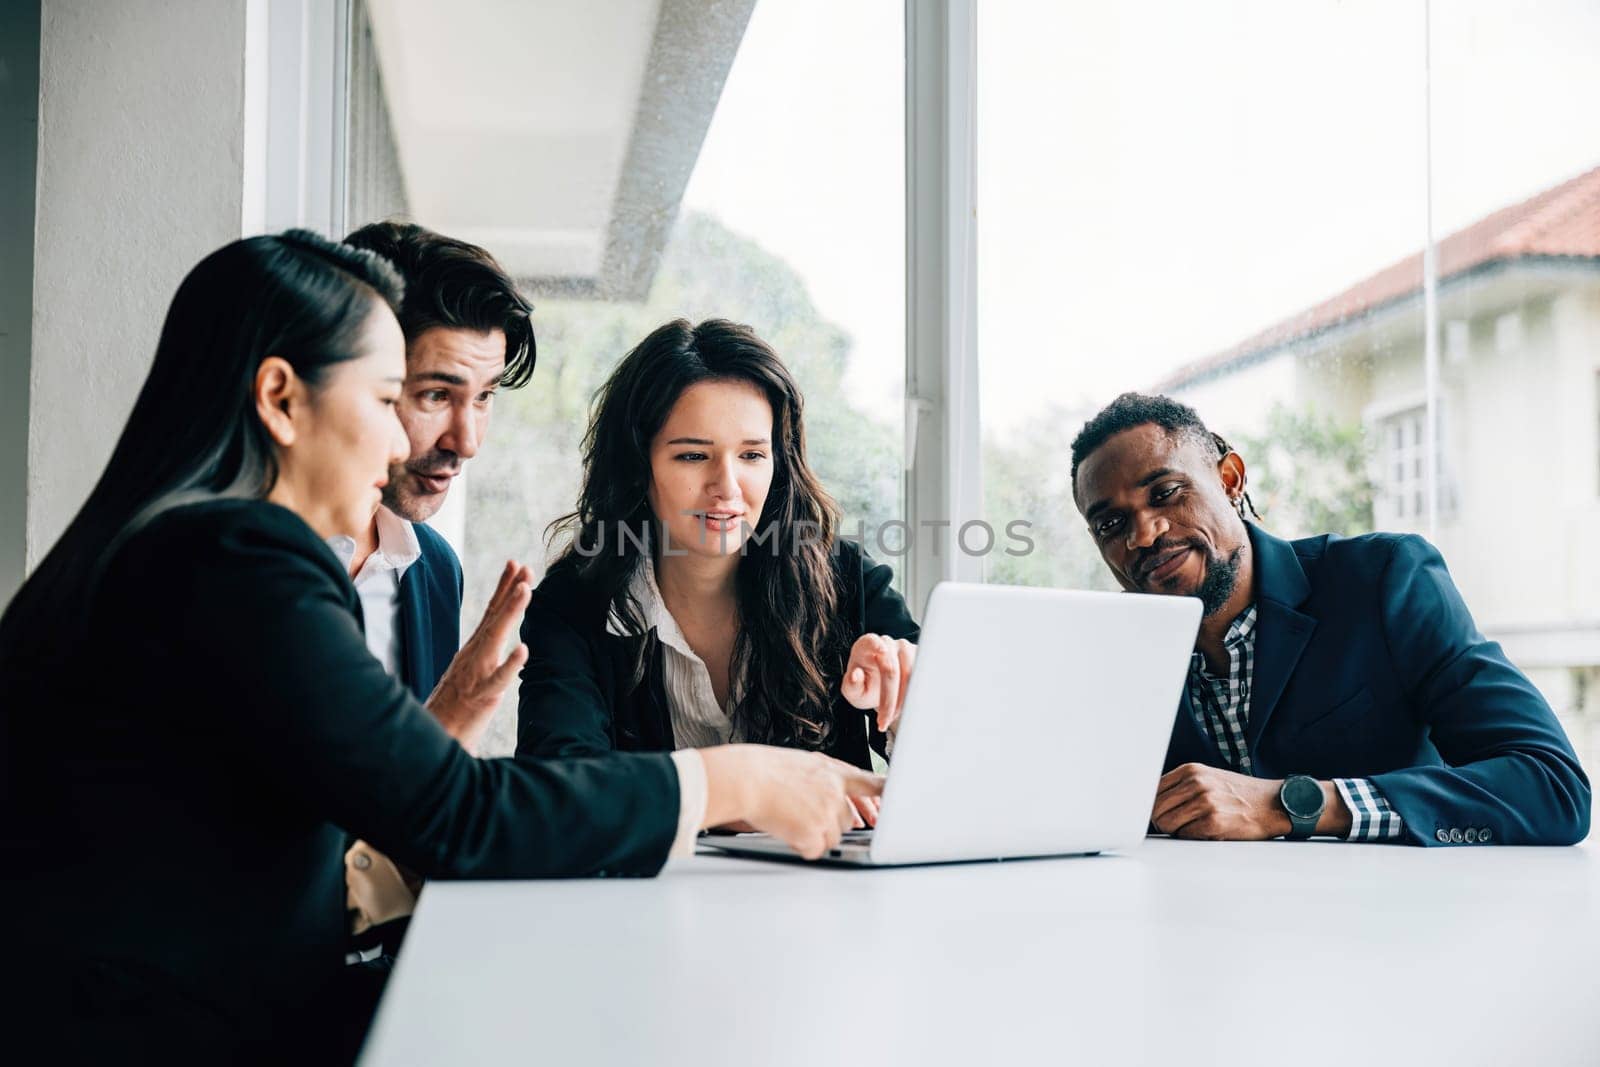 In an office meeting room, both men and women from diverse business team work together on laptop. Their teamwork, diversity and collaboration are palpable they discuss plan and strategize for success. by Sorapop